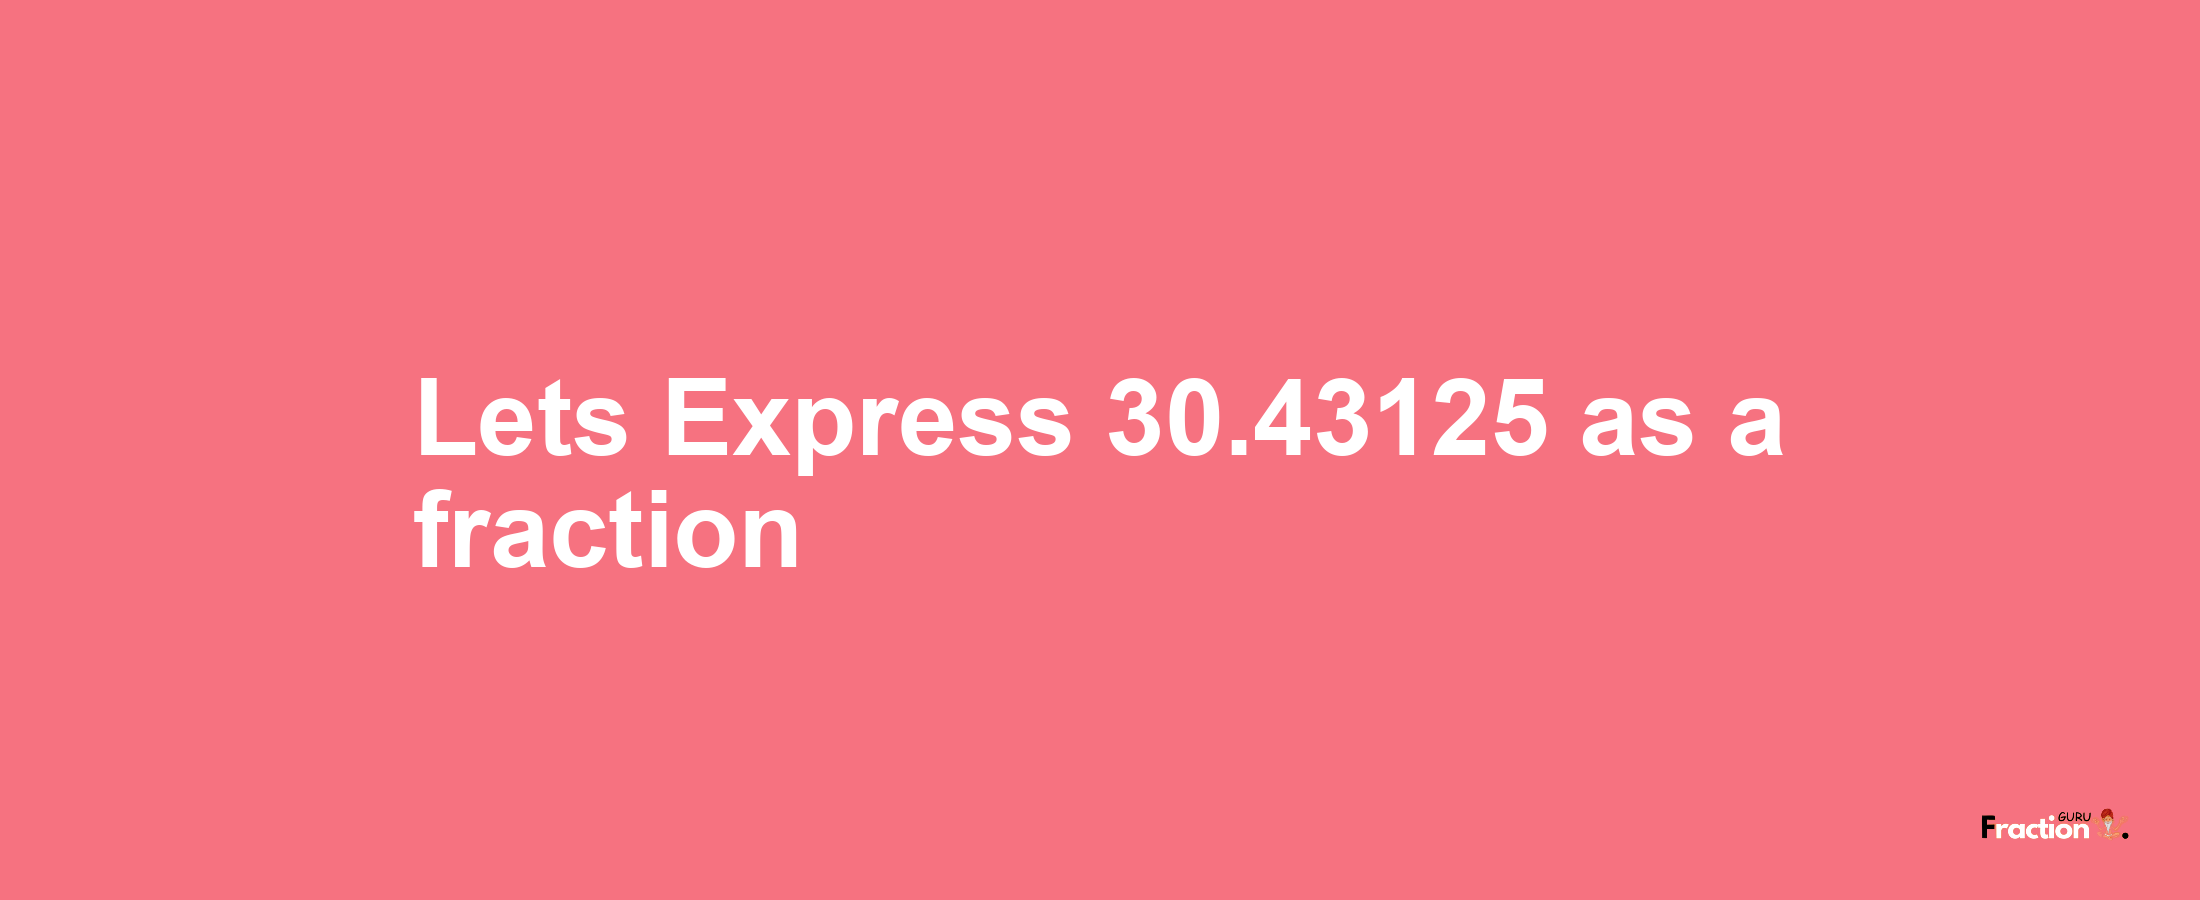 Lets Express 30.43125 as afraction